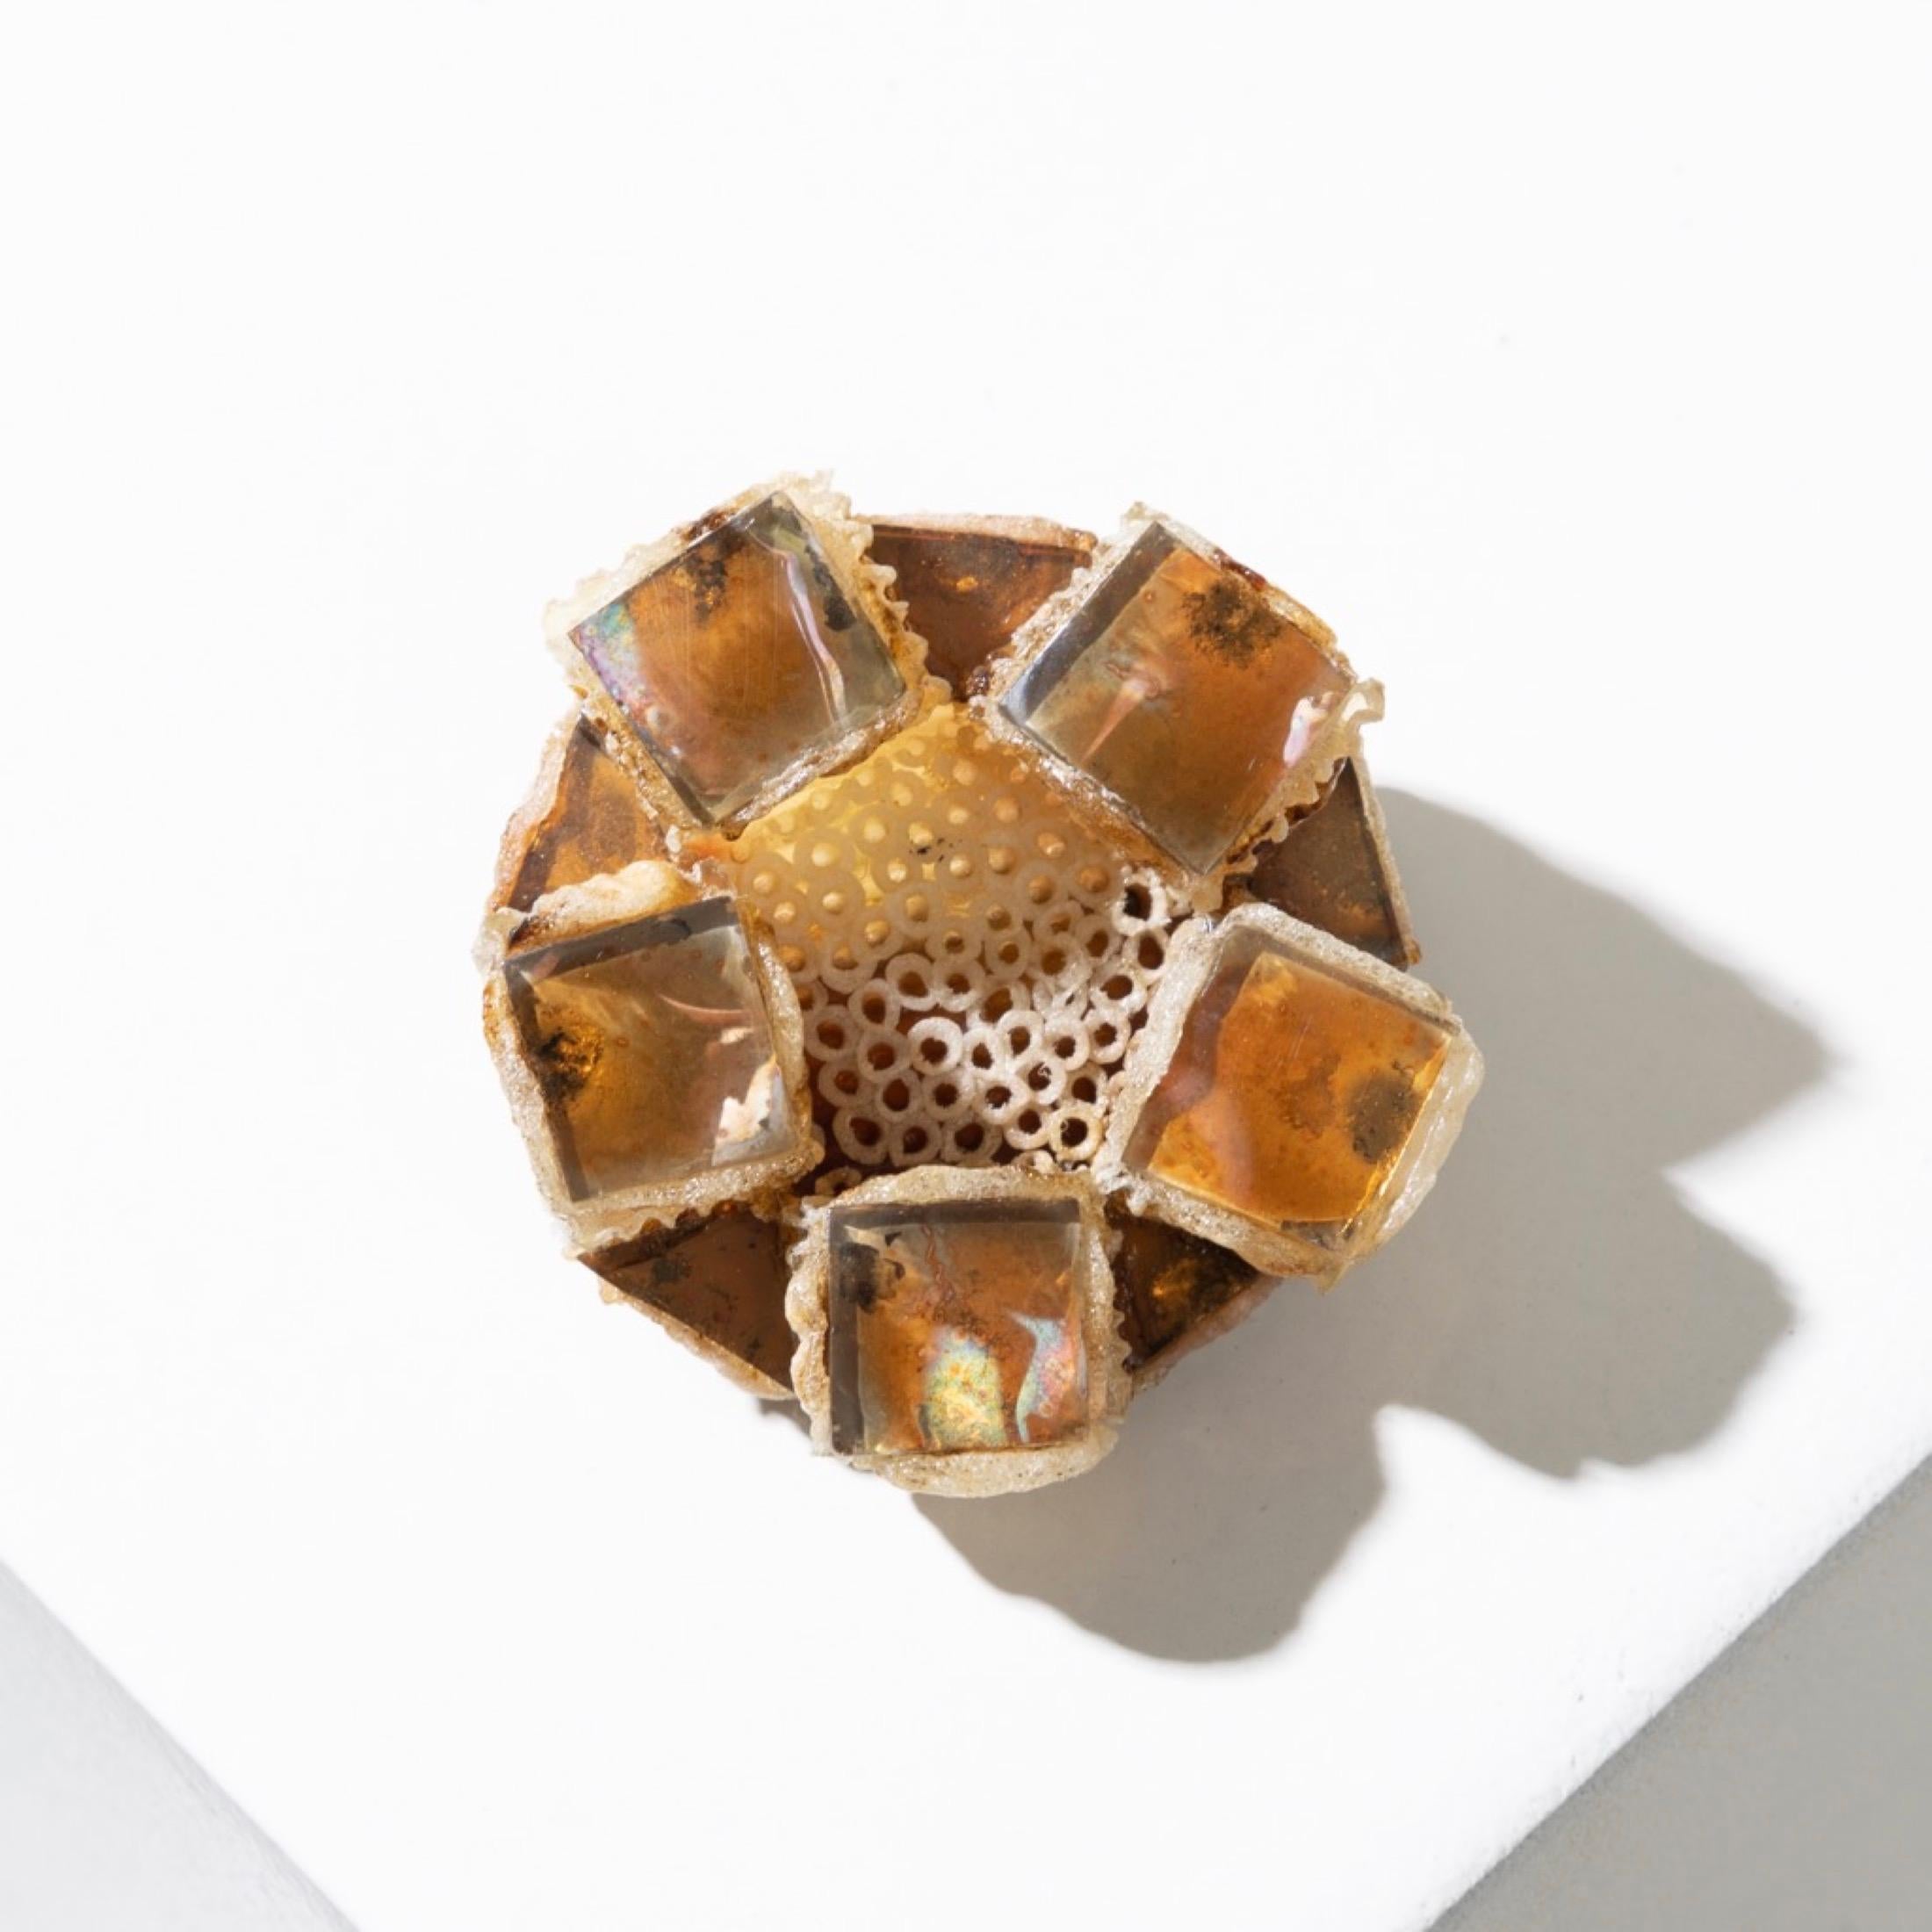 This beige Talosel brooch is a unique piece of jewelry that perfectly captures the aesthetic characteristic of Line Vautrin’s work. It is adorned with small amber colored mirrors, which are intricately embedded in the beige Talosel to create a